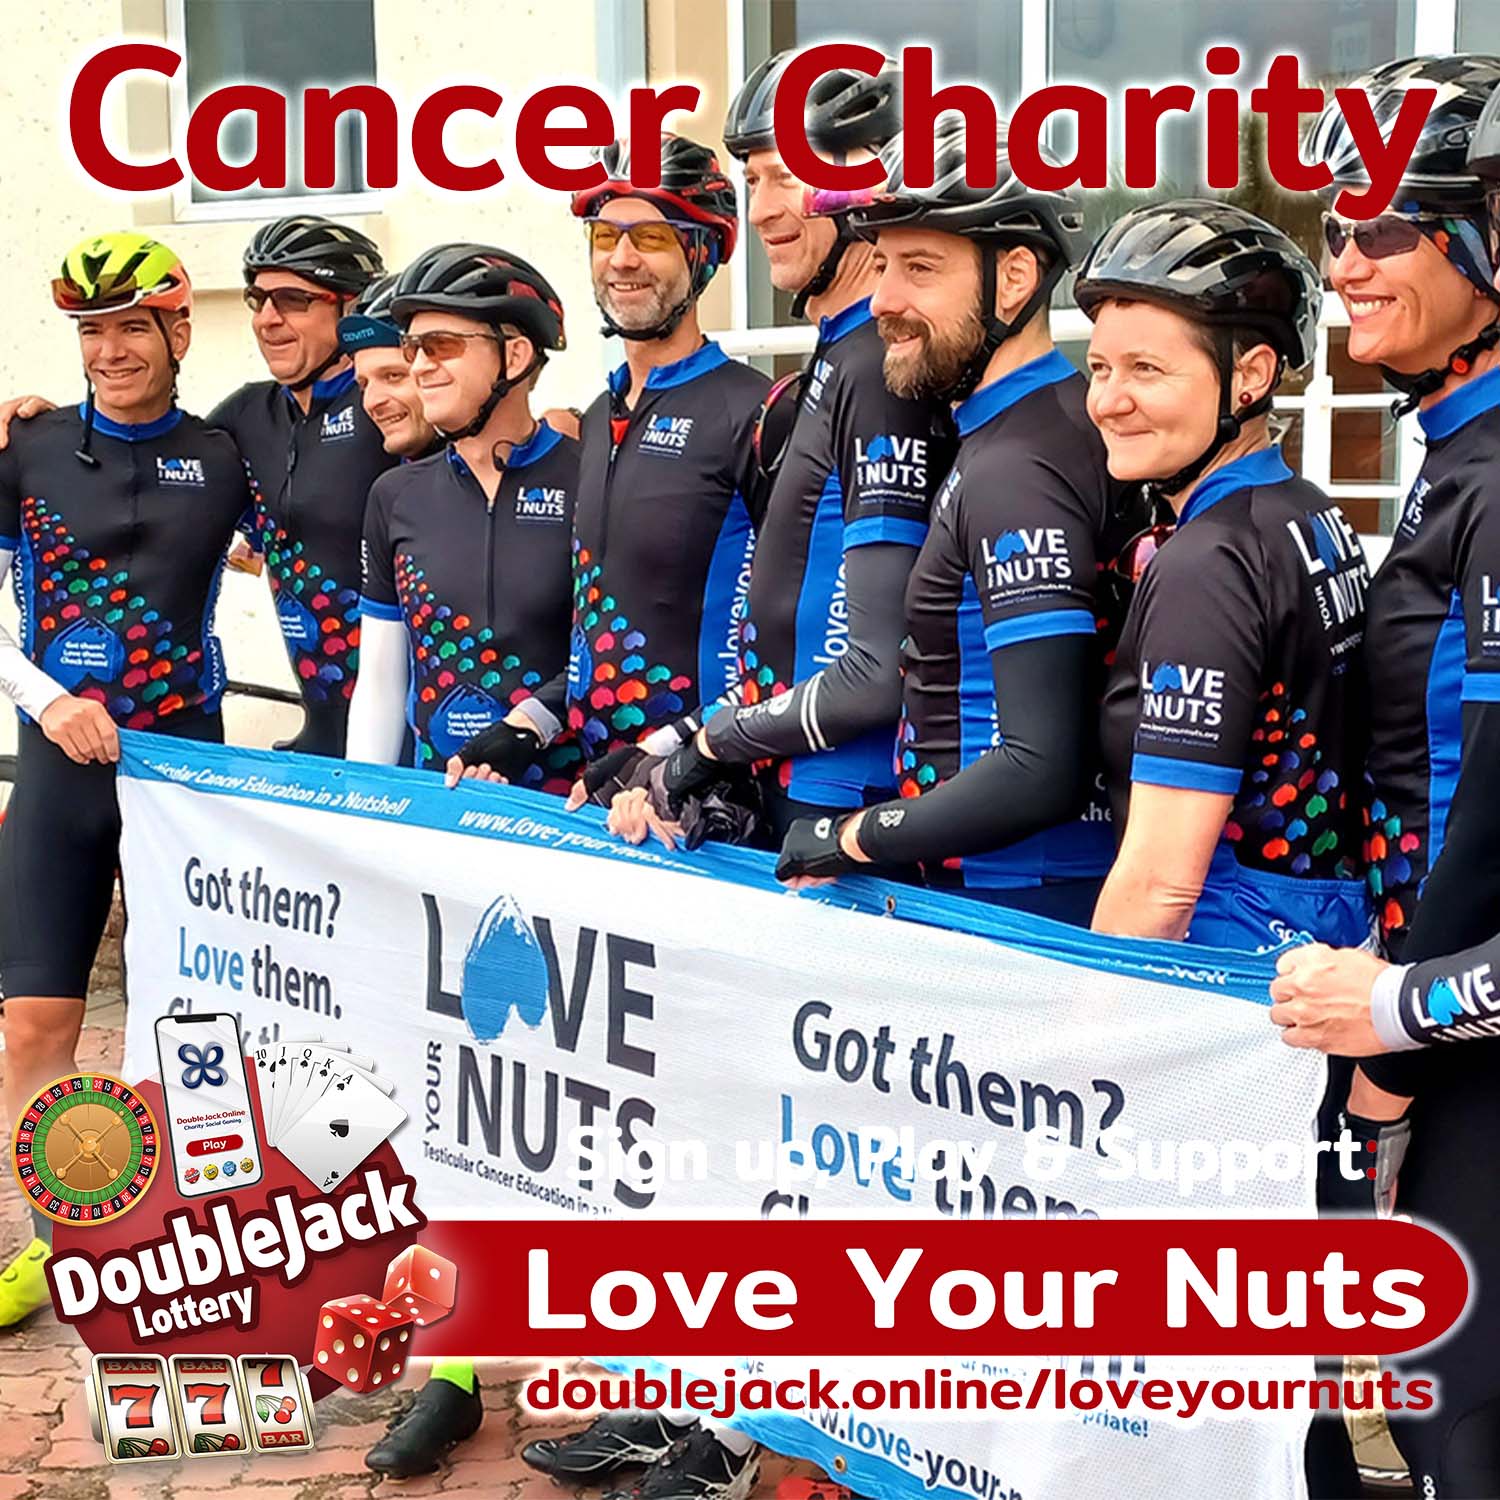 Love Your Nuts Foundation - doublejack Cancer Charity 